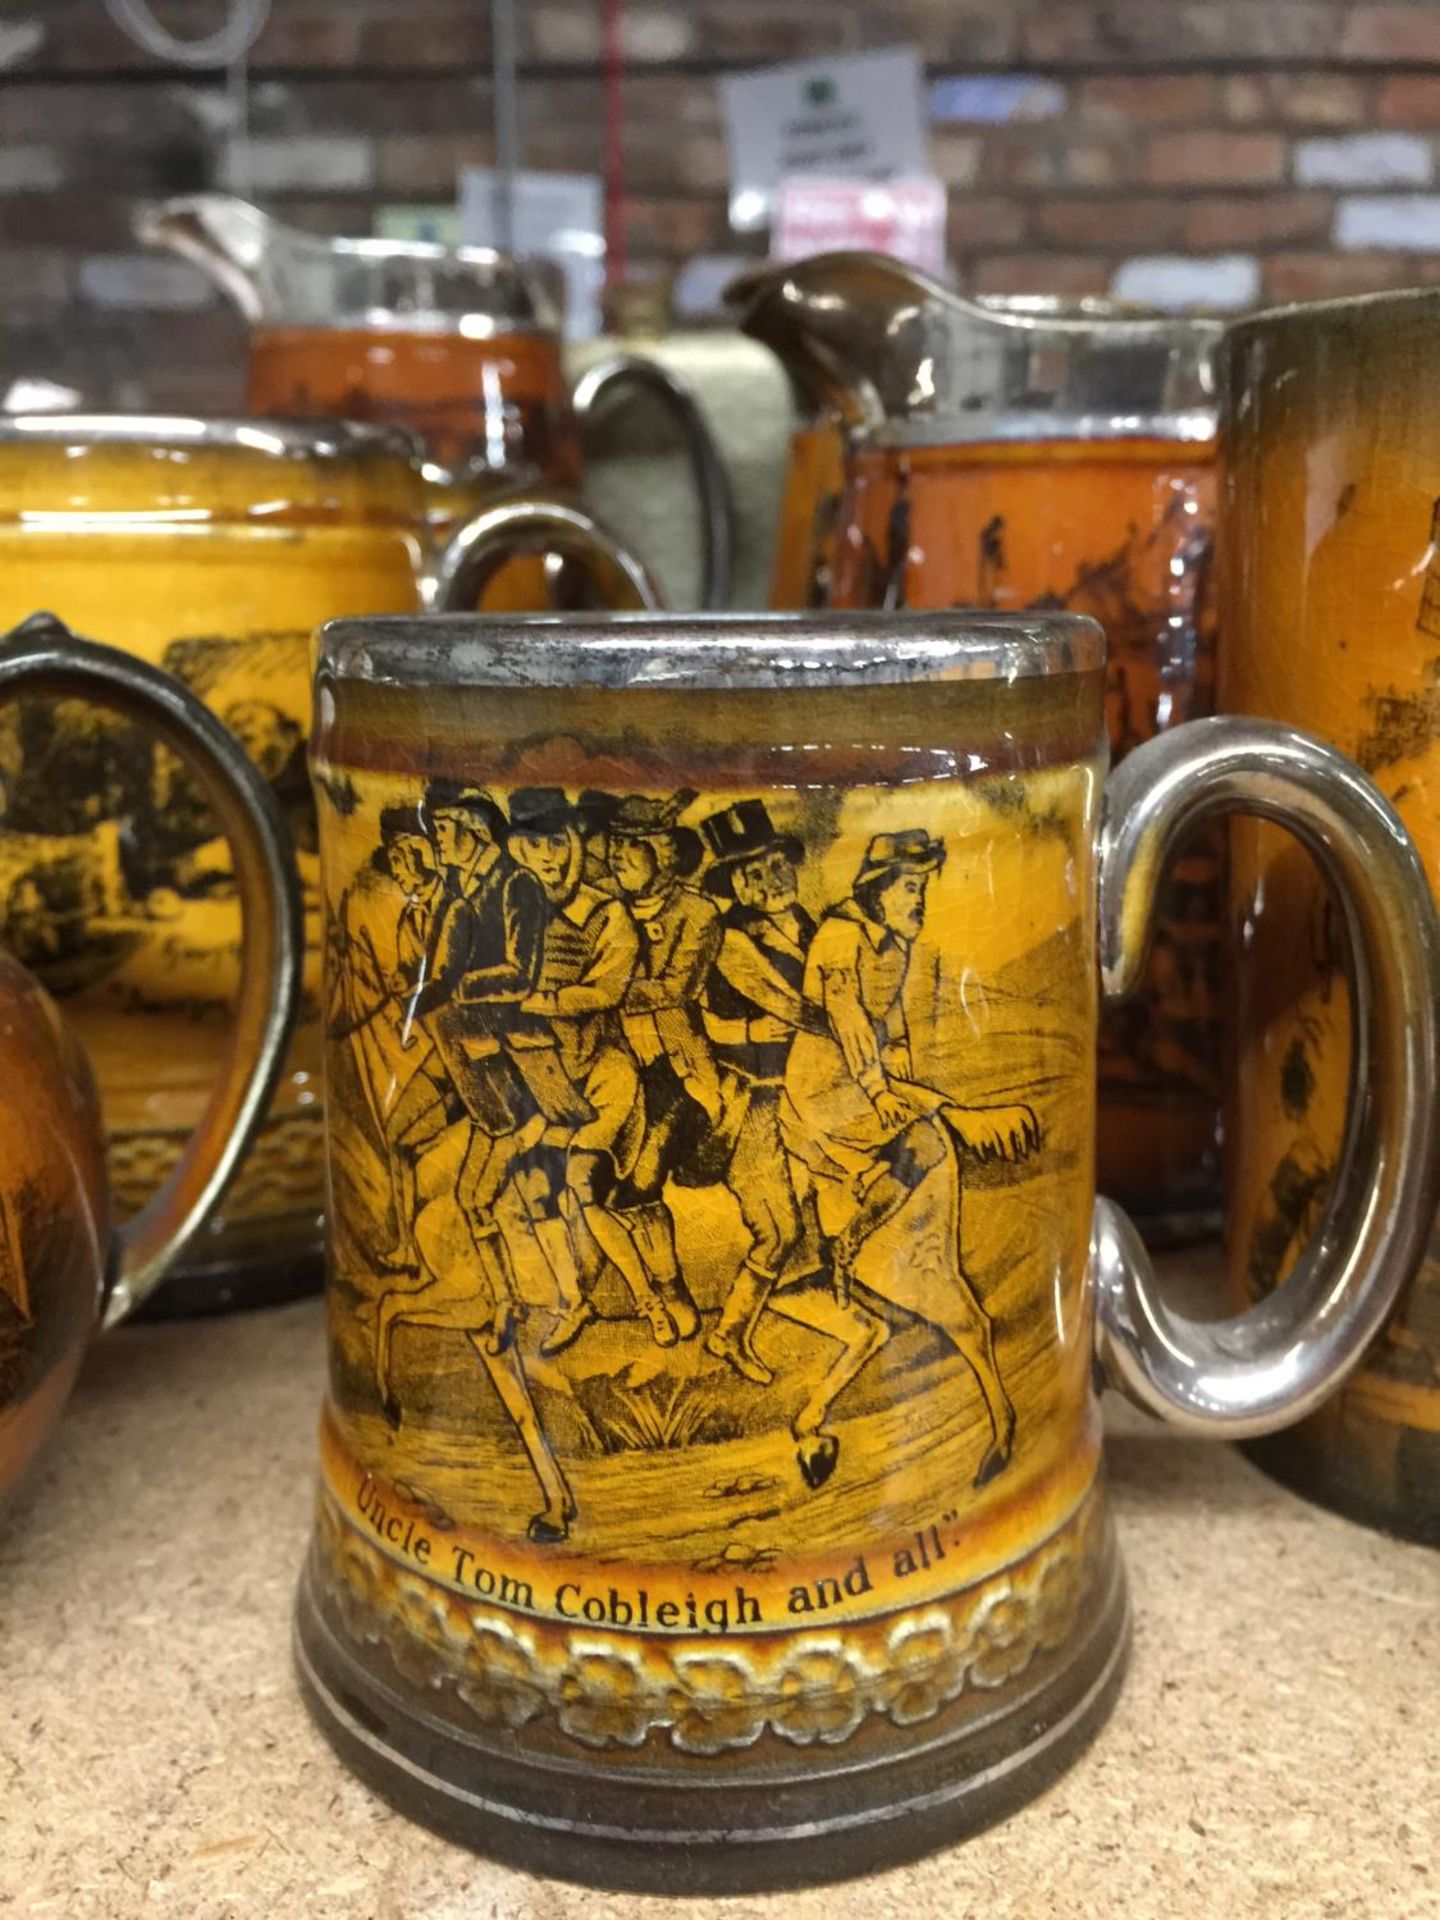 A COLLECTION OF VINTAGE CHARACTER MUGS AND JUGS TO INCLUDE 'UNCLE TOM COBLEIGH AND ALL', ETC - Image 3 of 6